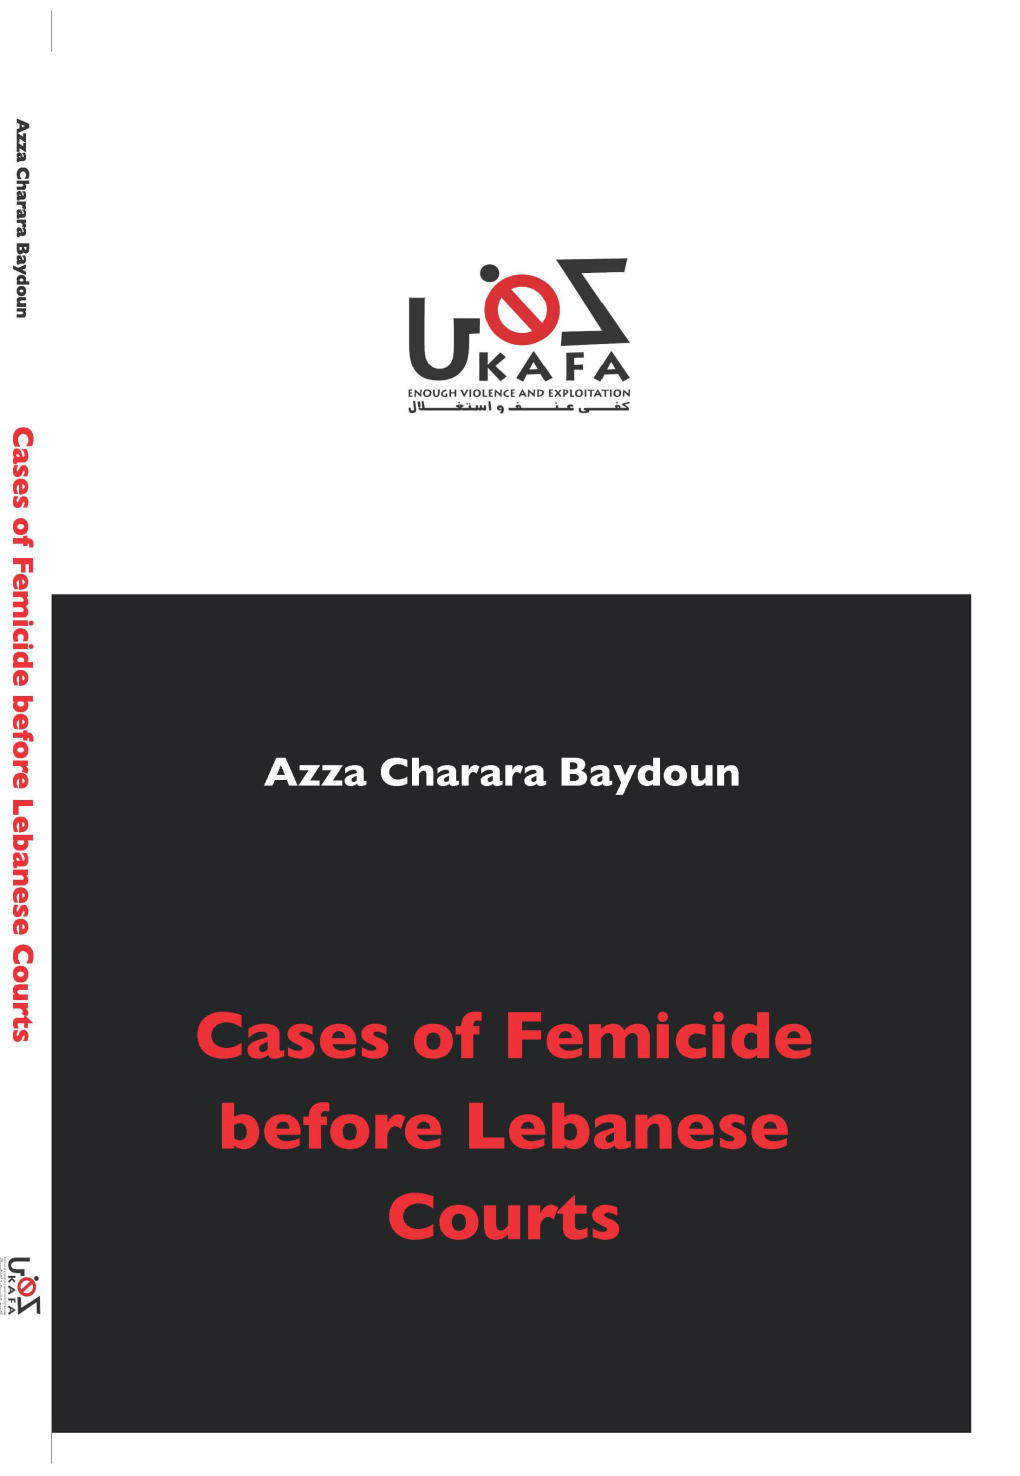 Crimes of Femicide Before the Lebanese Courts